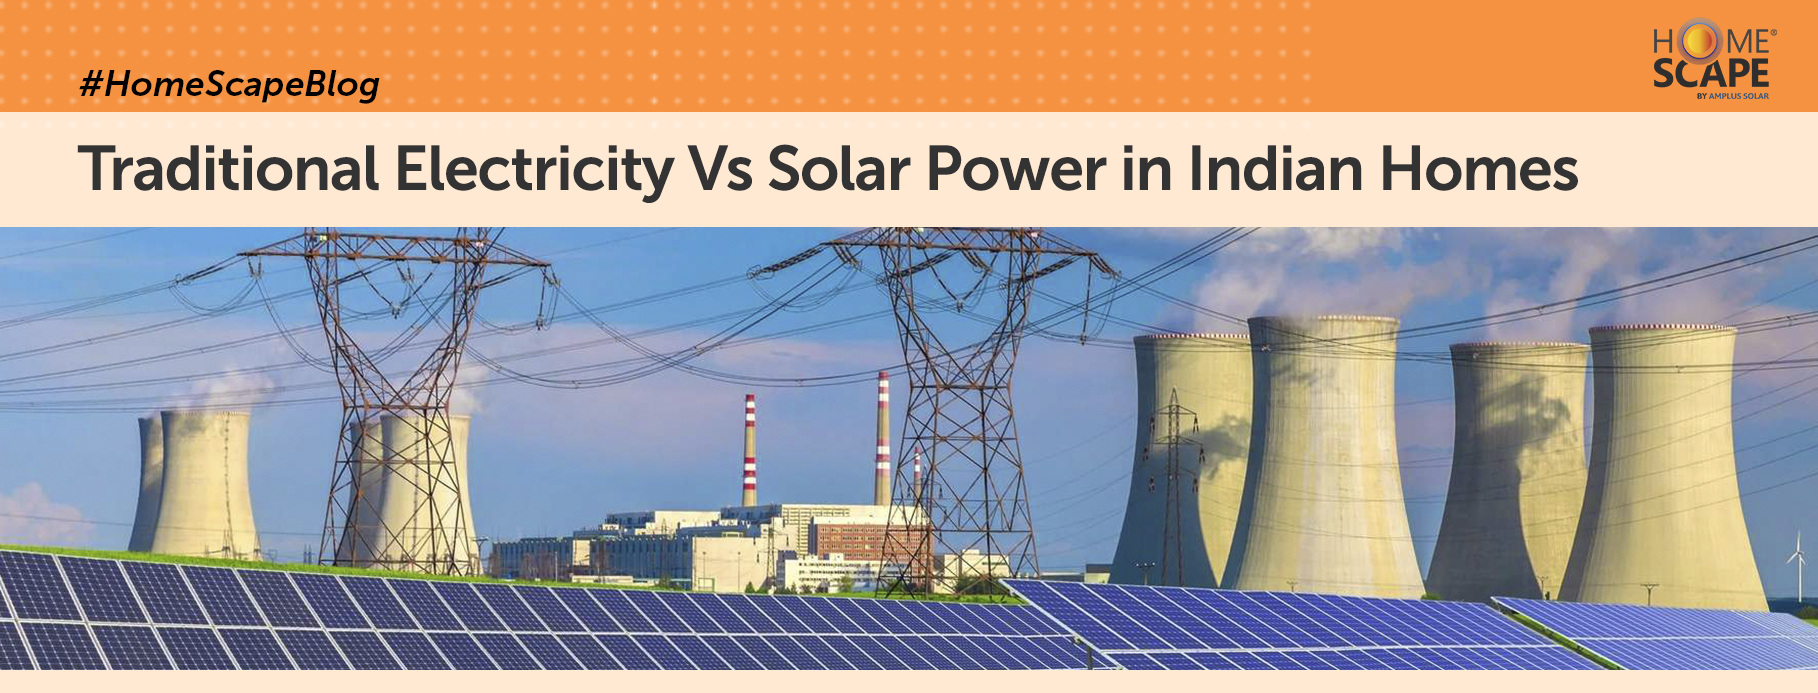 Traditional Electricity Vs Solar Power in Indian Homes